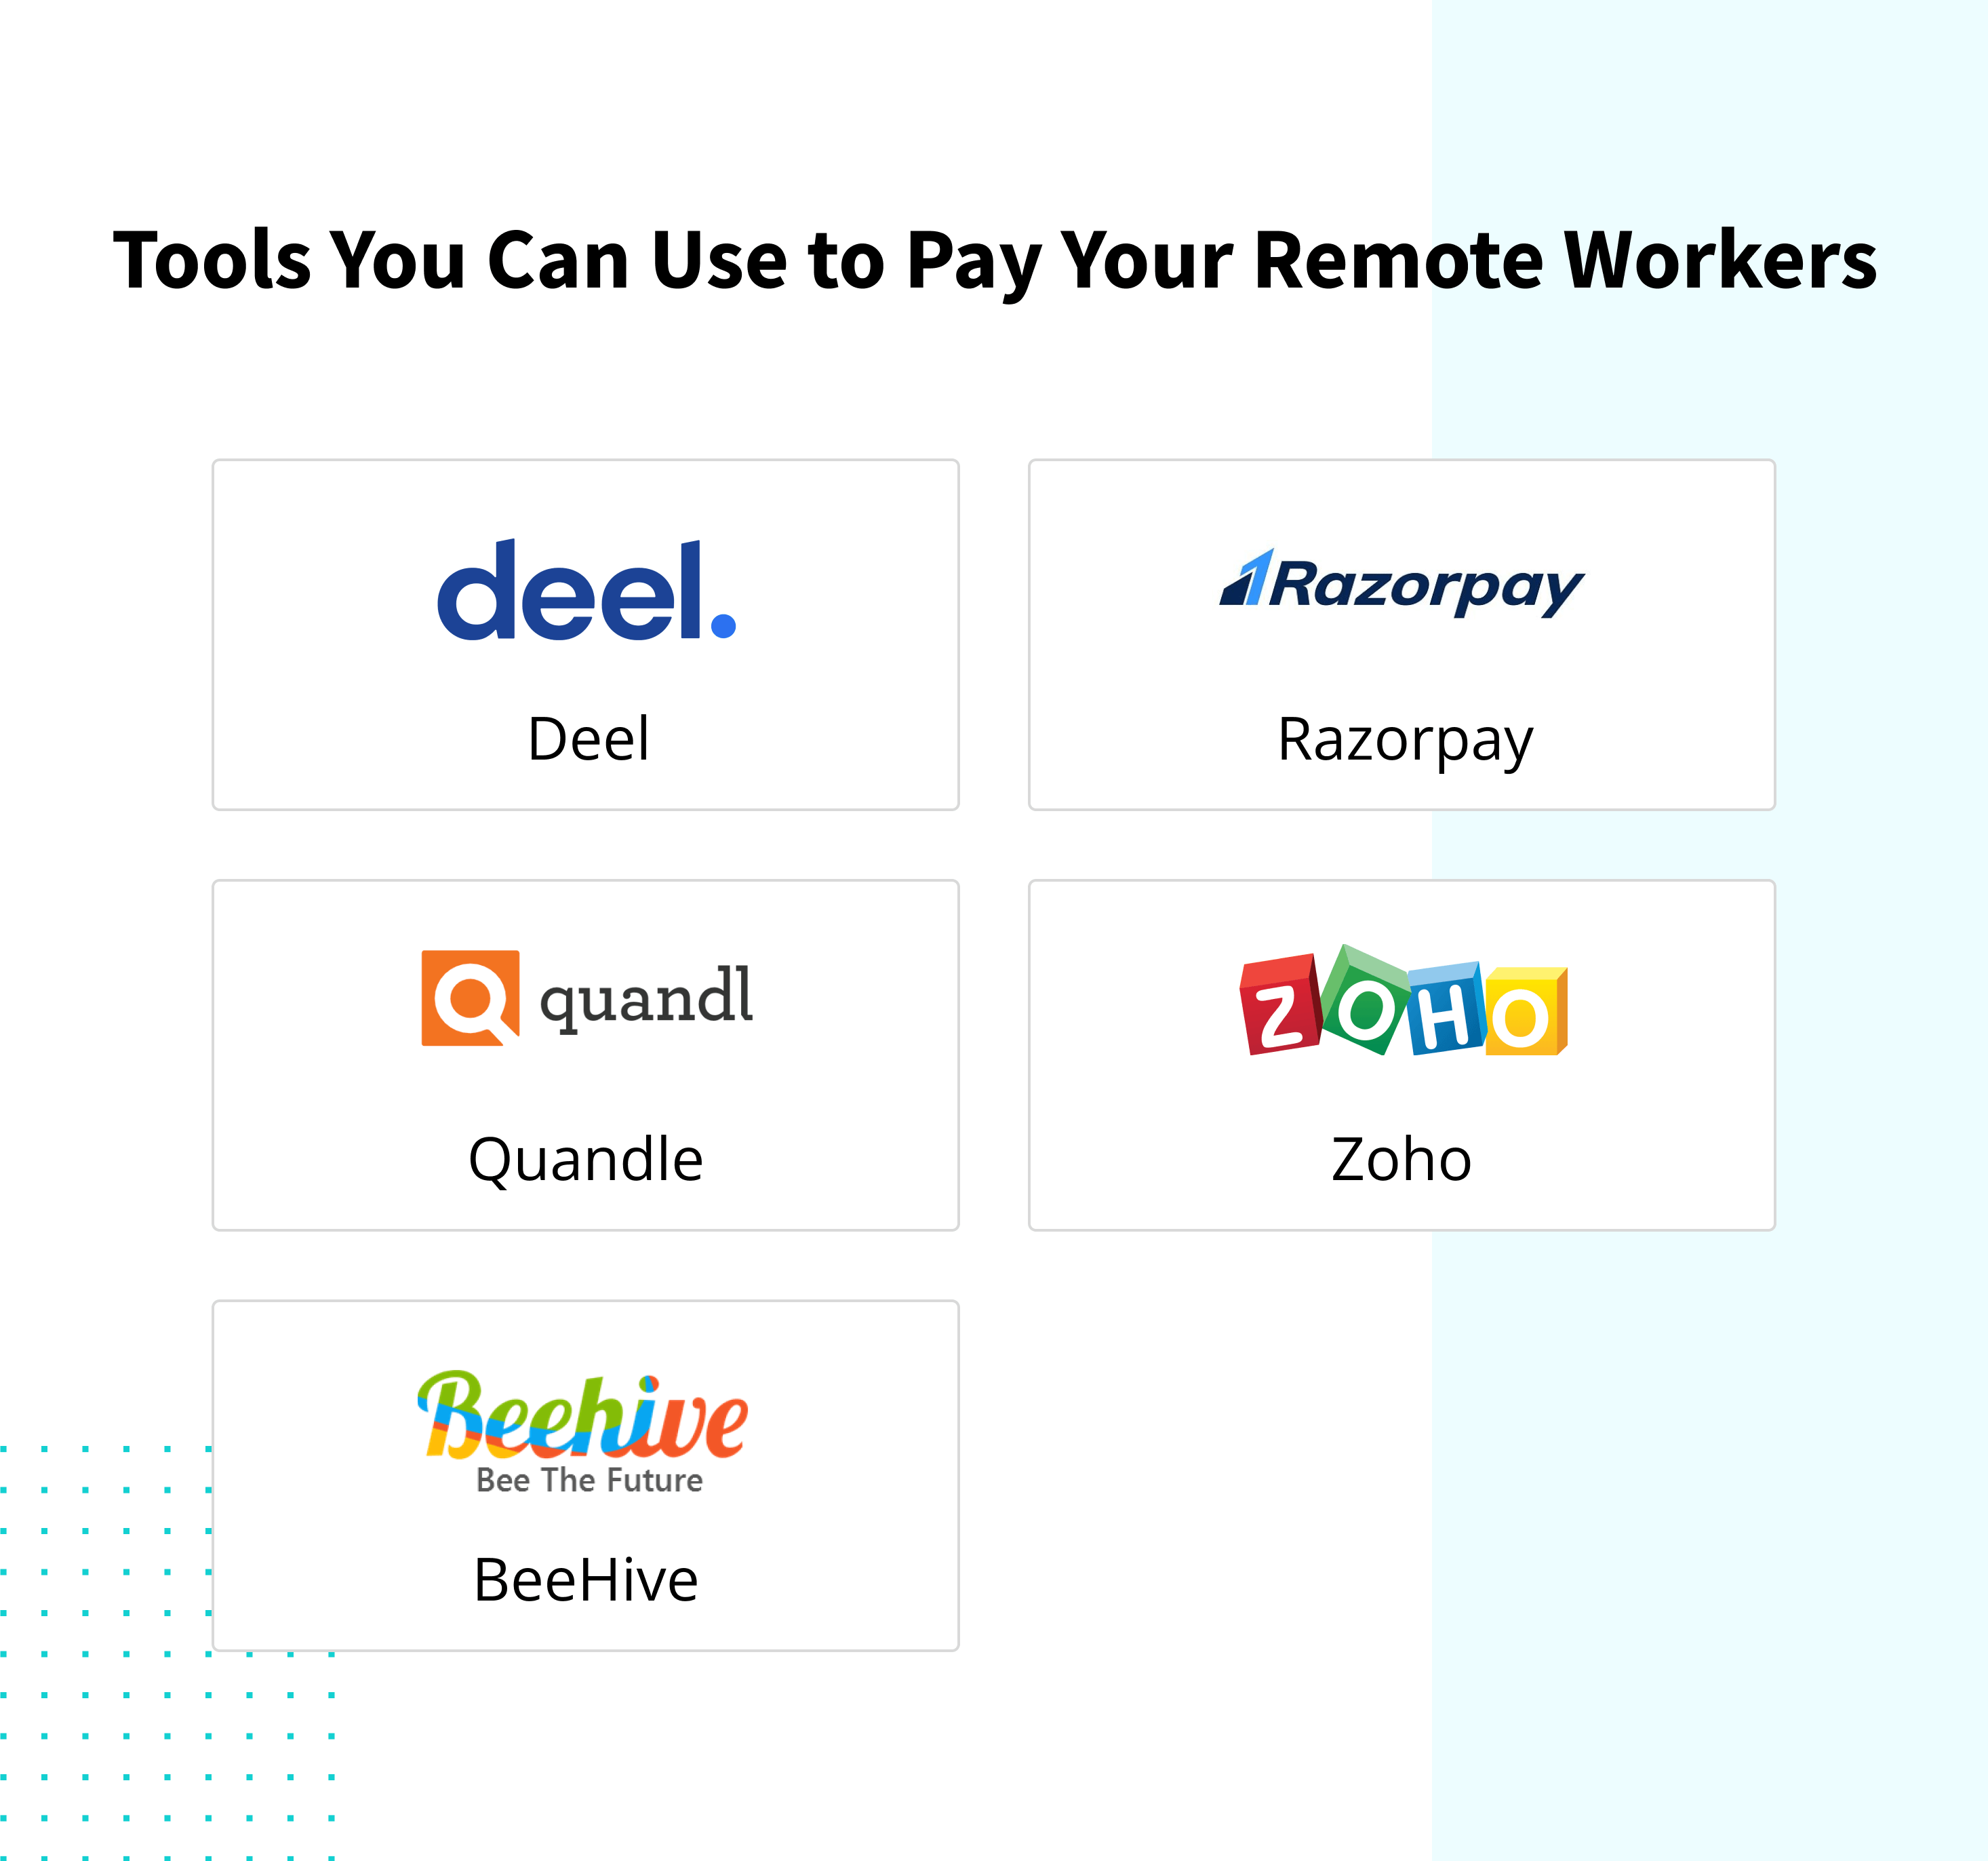 Tools You Can Use to Pay Your Remote Workers